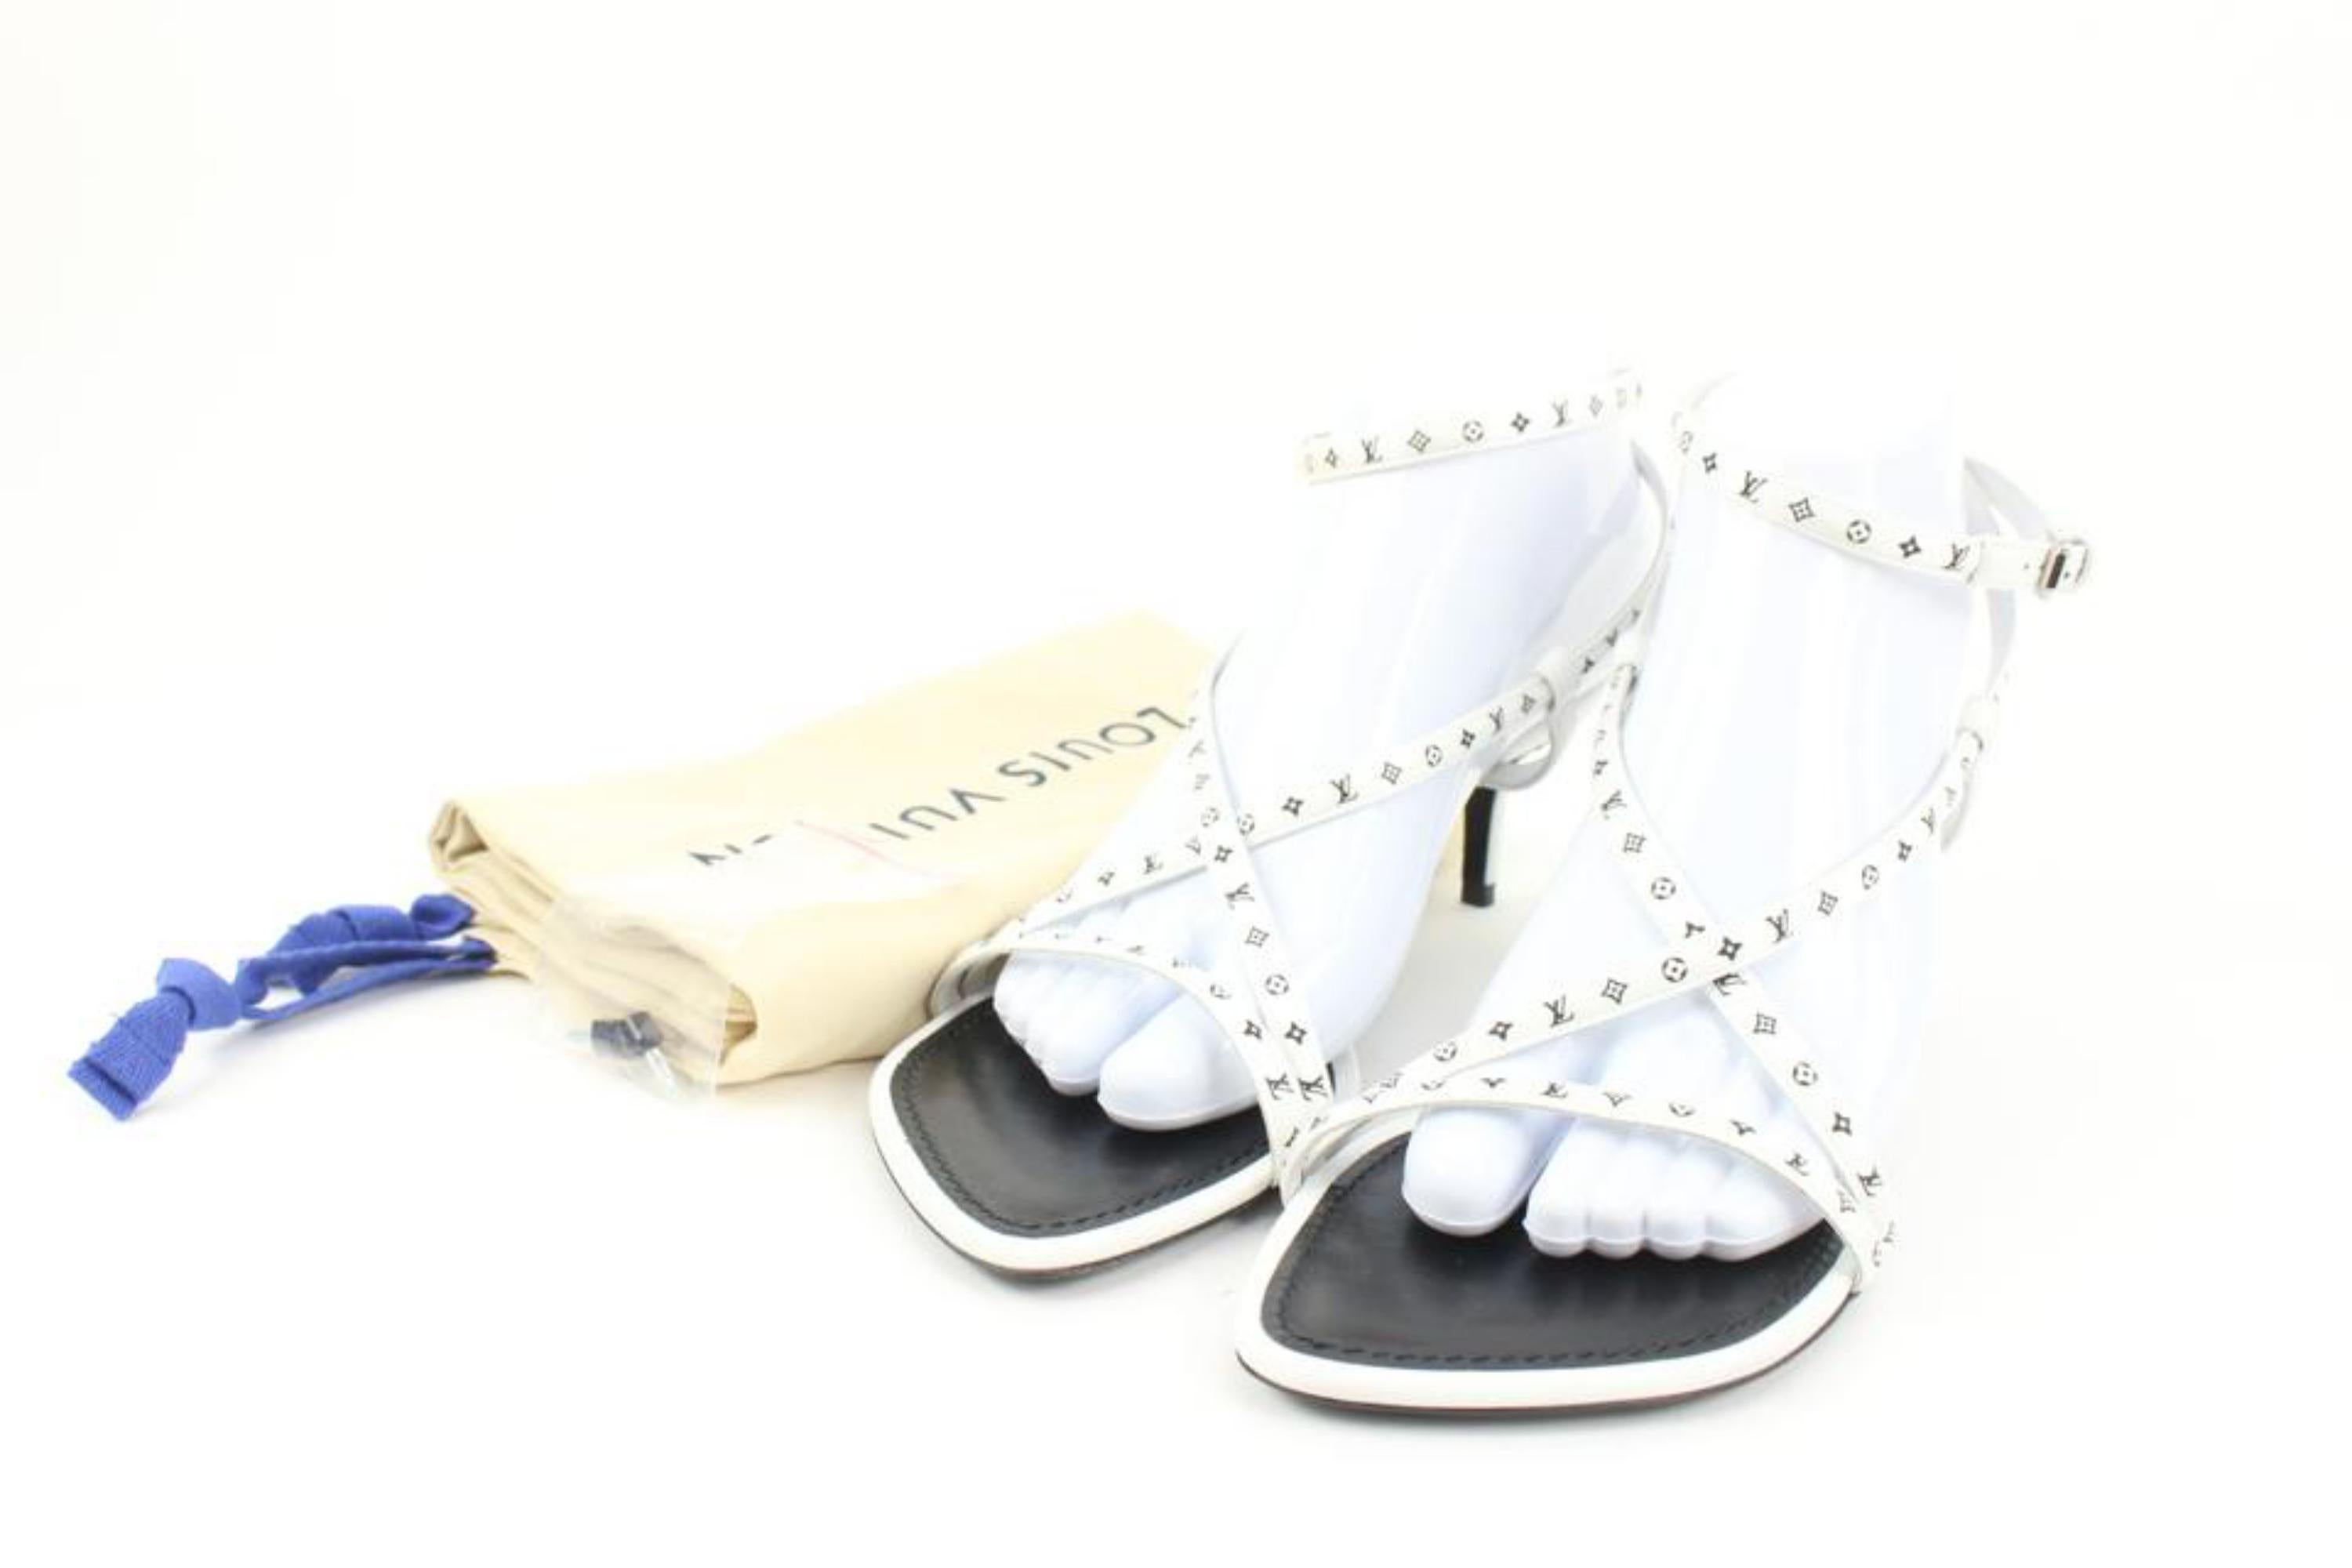 Louis Vuitton Women's 39 White Monogram Citizen Strappy Sandal Heels s27lv97
Made In: Italy
Measurements: Length:  10